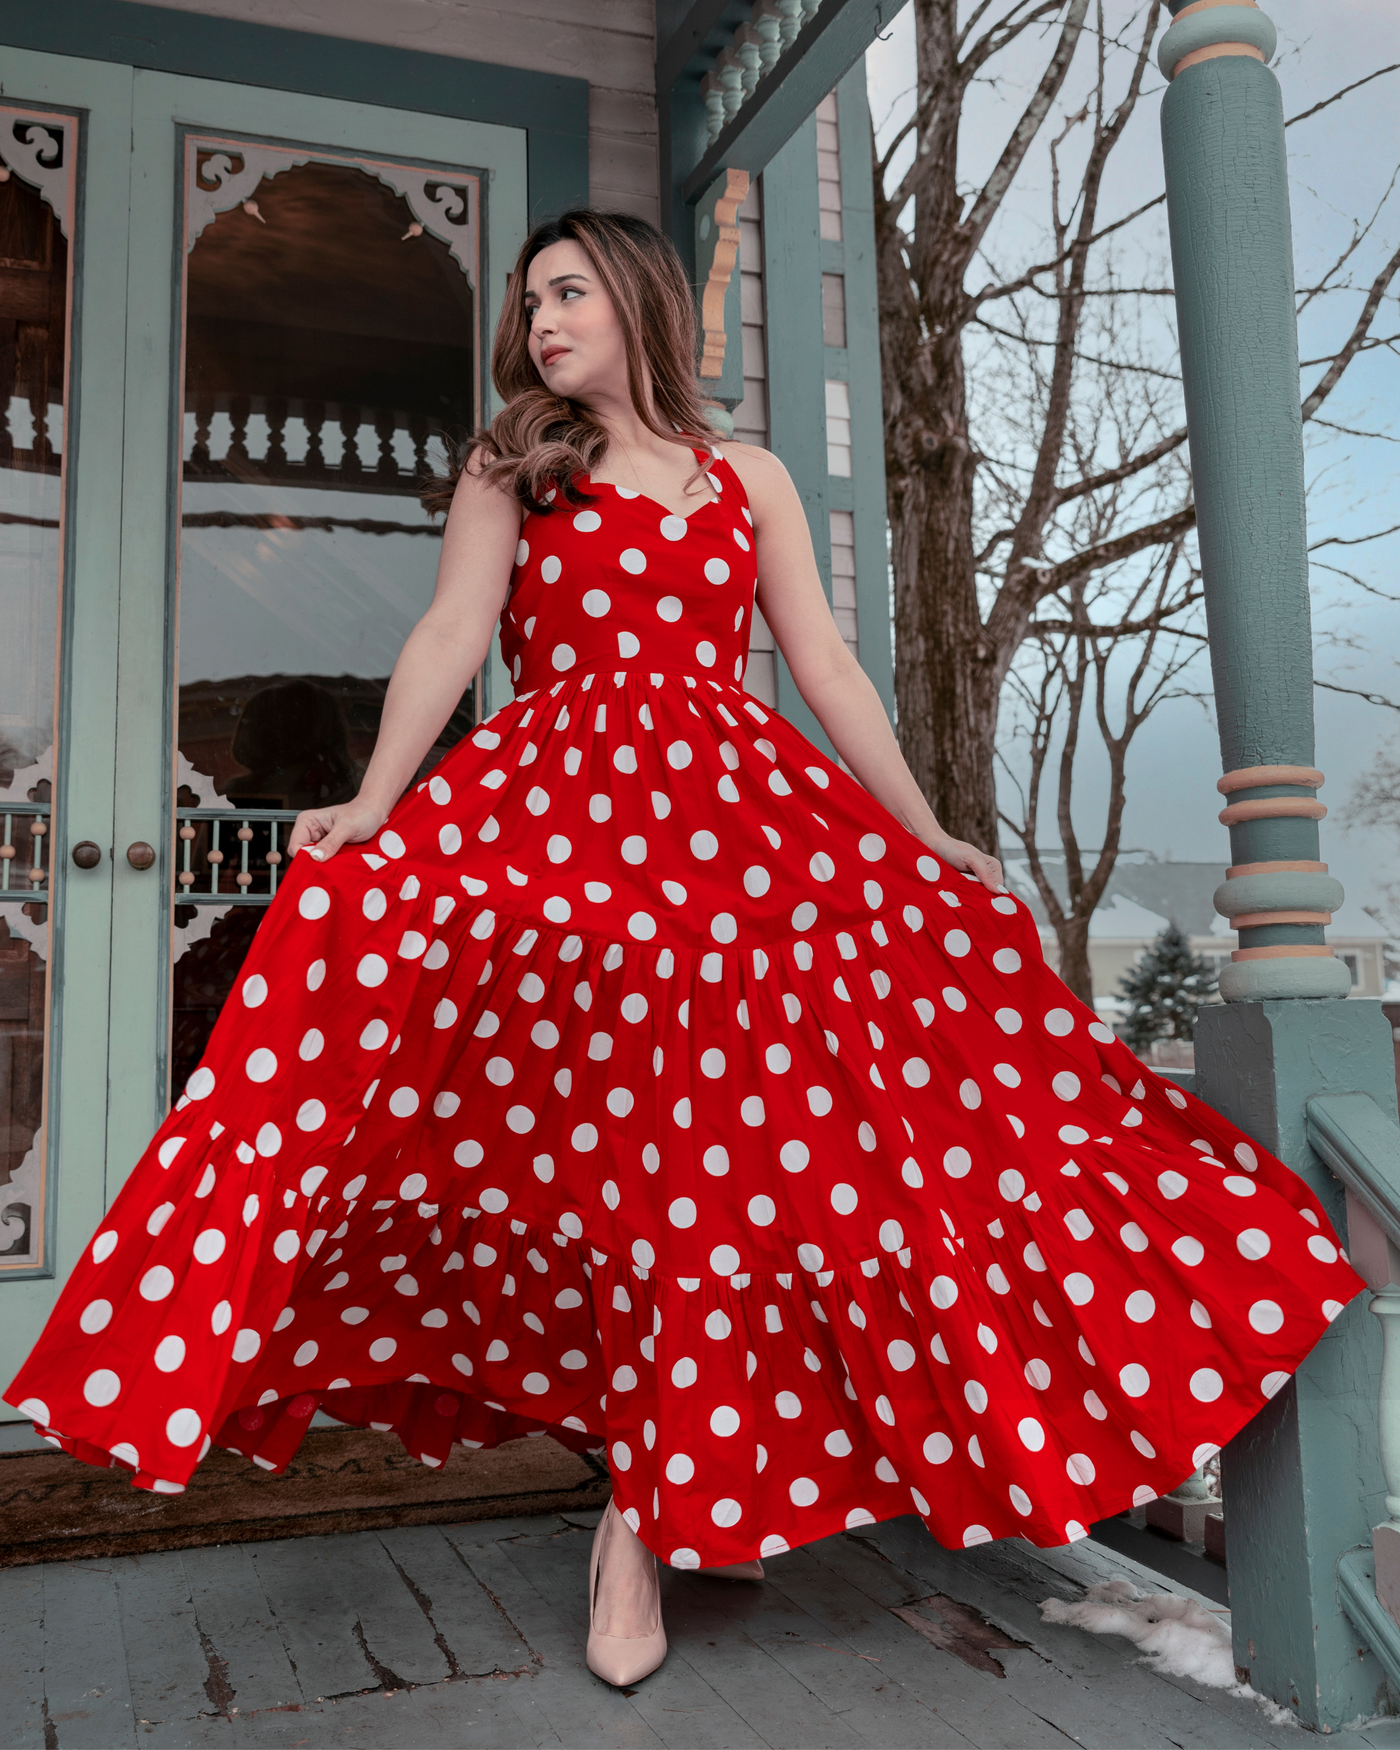 Currant Red Polka Cotton Dress